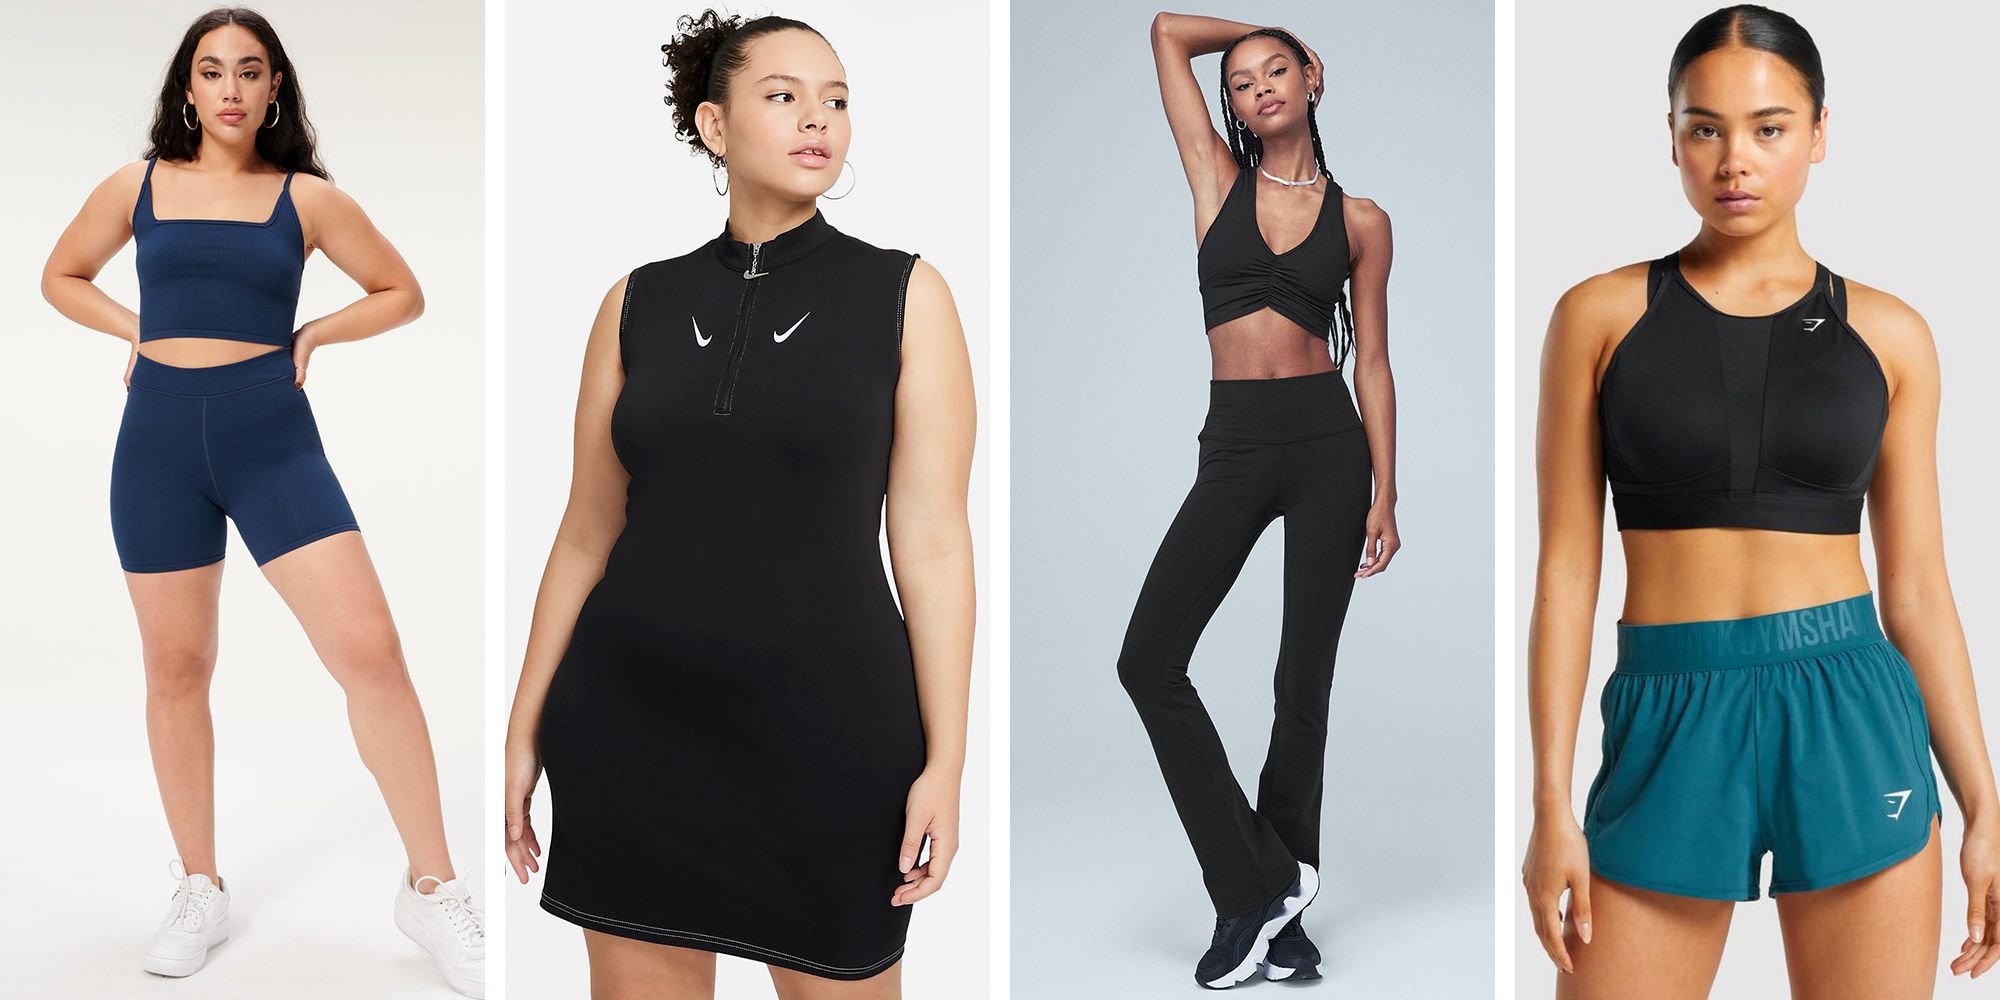 Stay stylish and comfortable in our activewear workout top